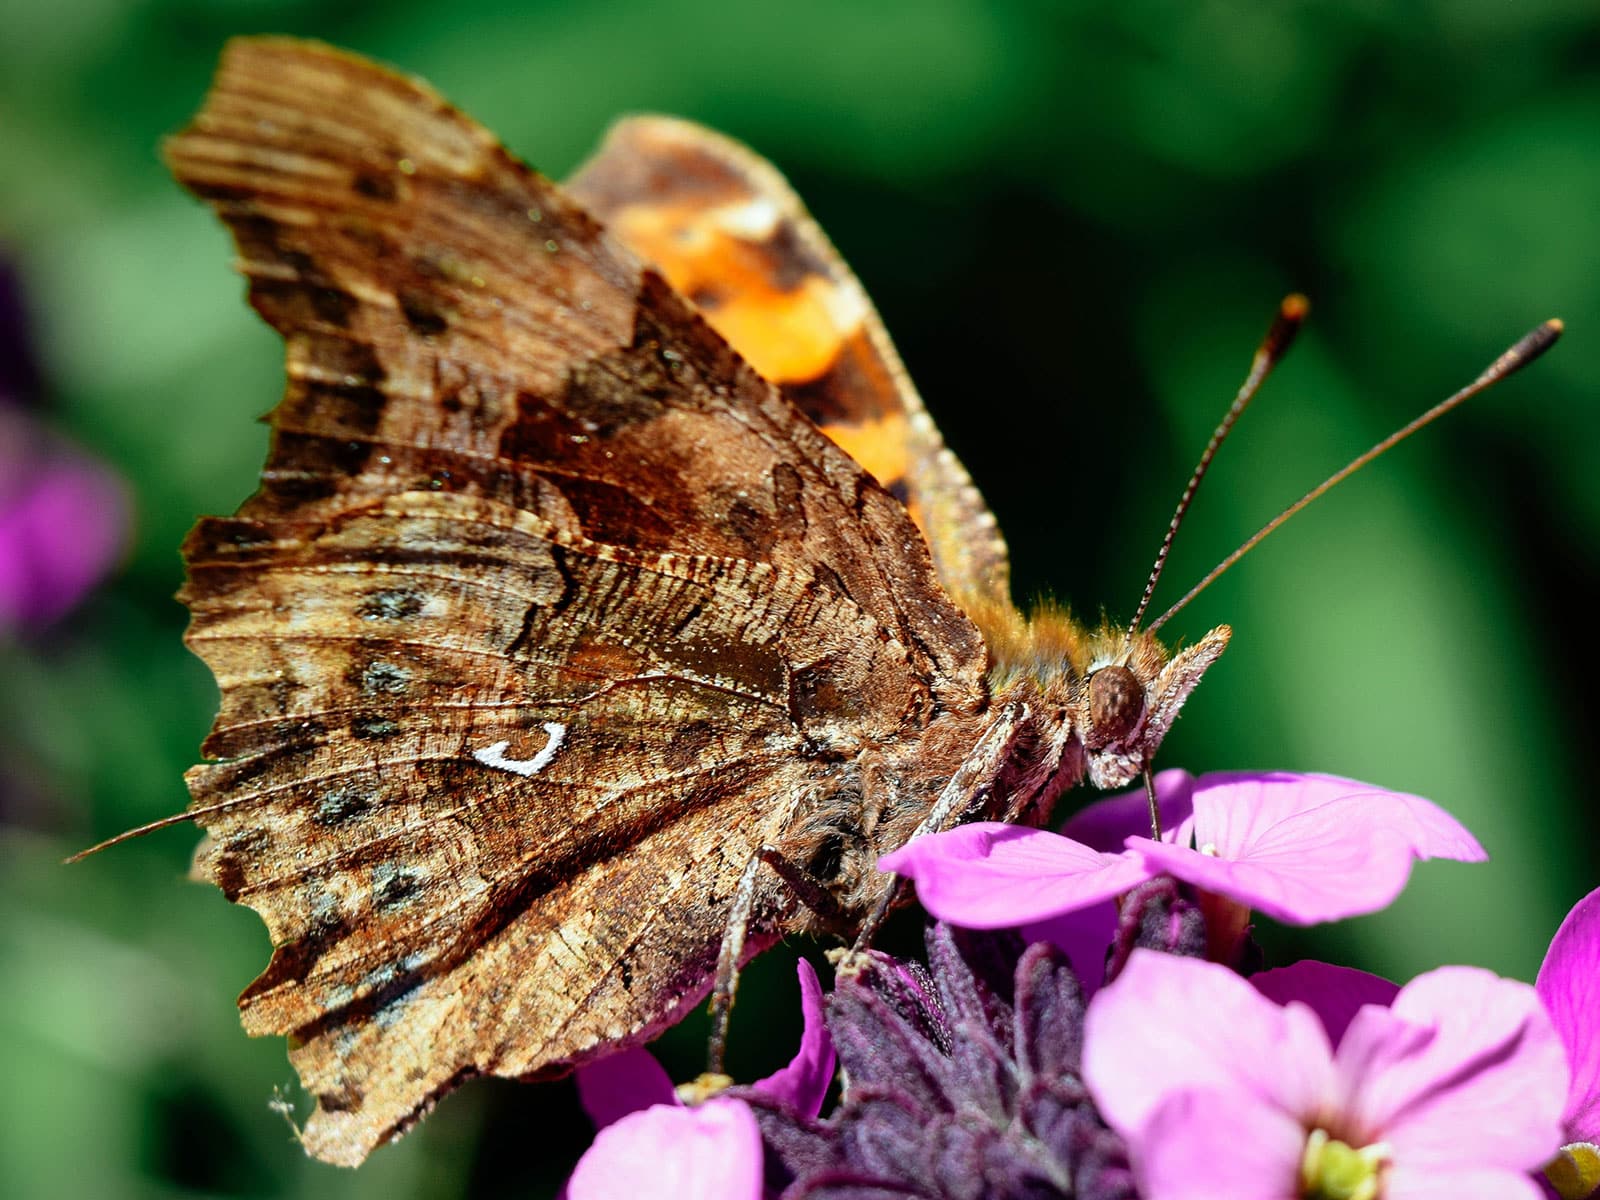 Comma butterfly with its wings folded up to reveal the characteristic white mark resembling a comma